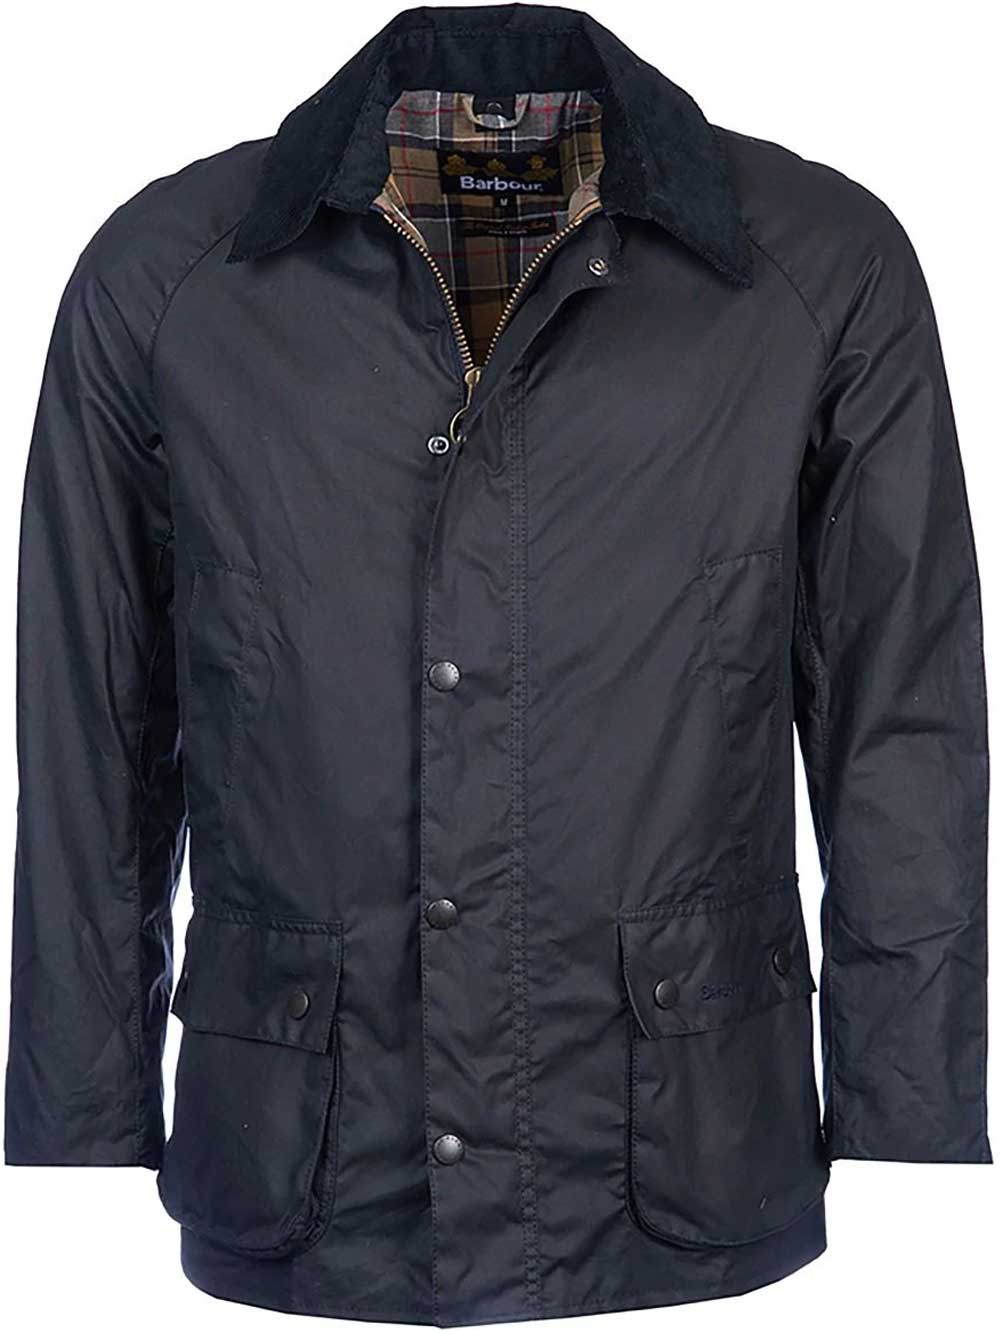 BARBOUR Wax Jacket - Mens Ashby 6oz Sylkoil Tailored Fit - Navy